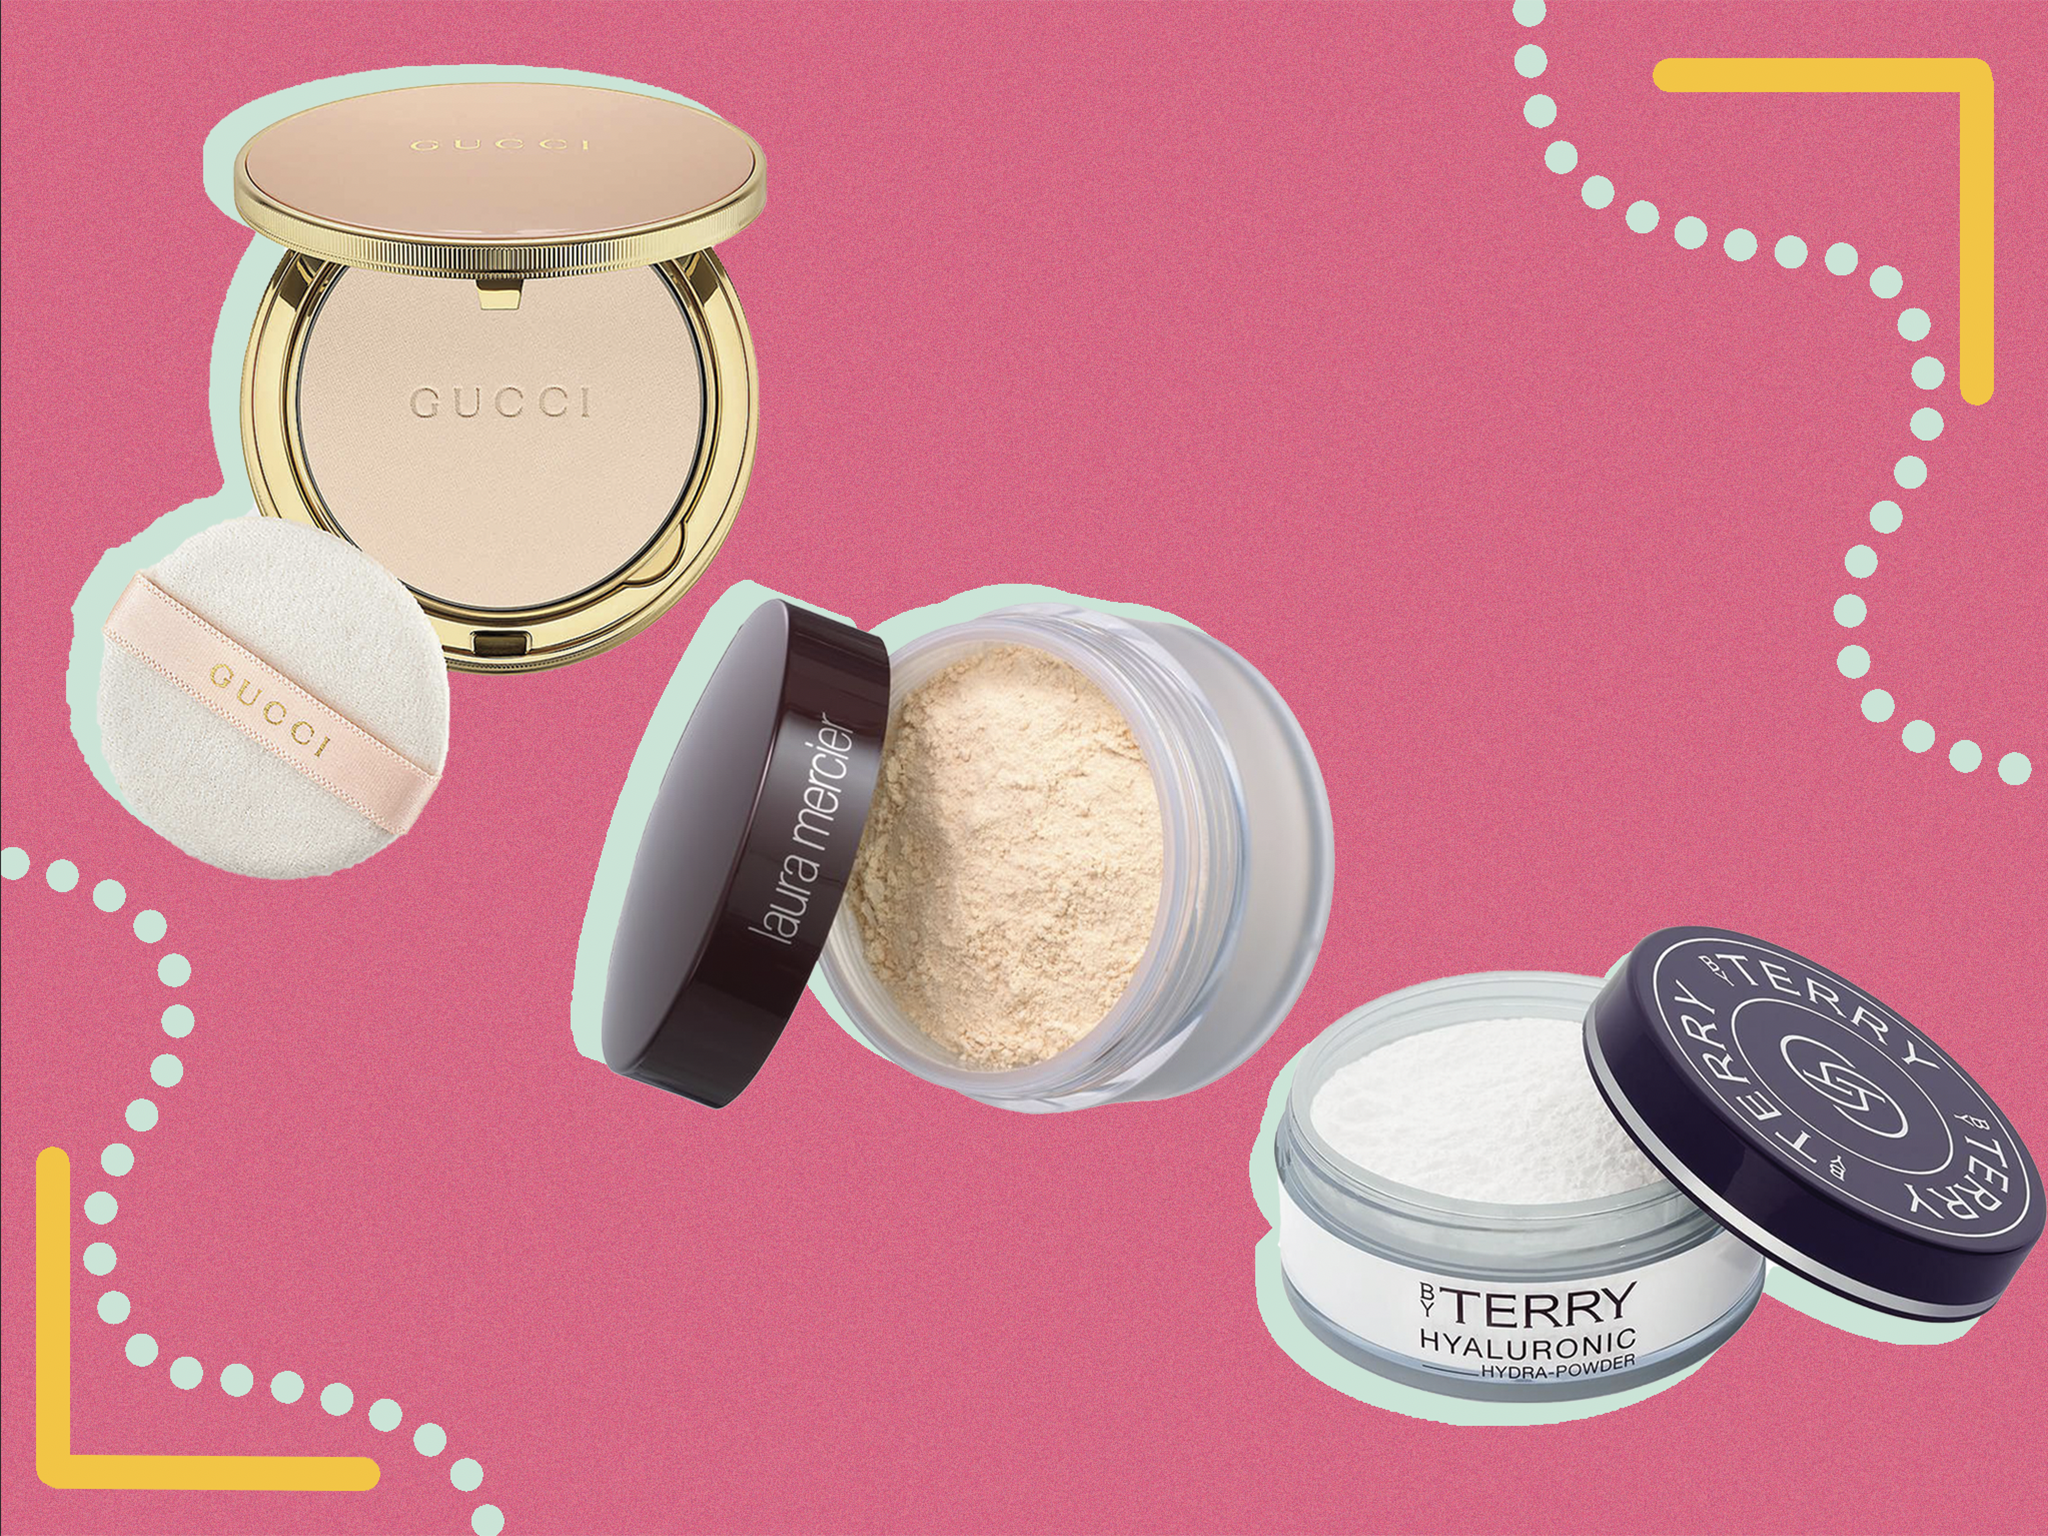 10 best face powders for baking and setting make-up